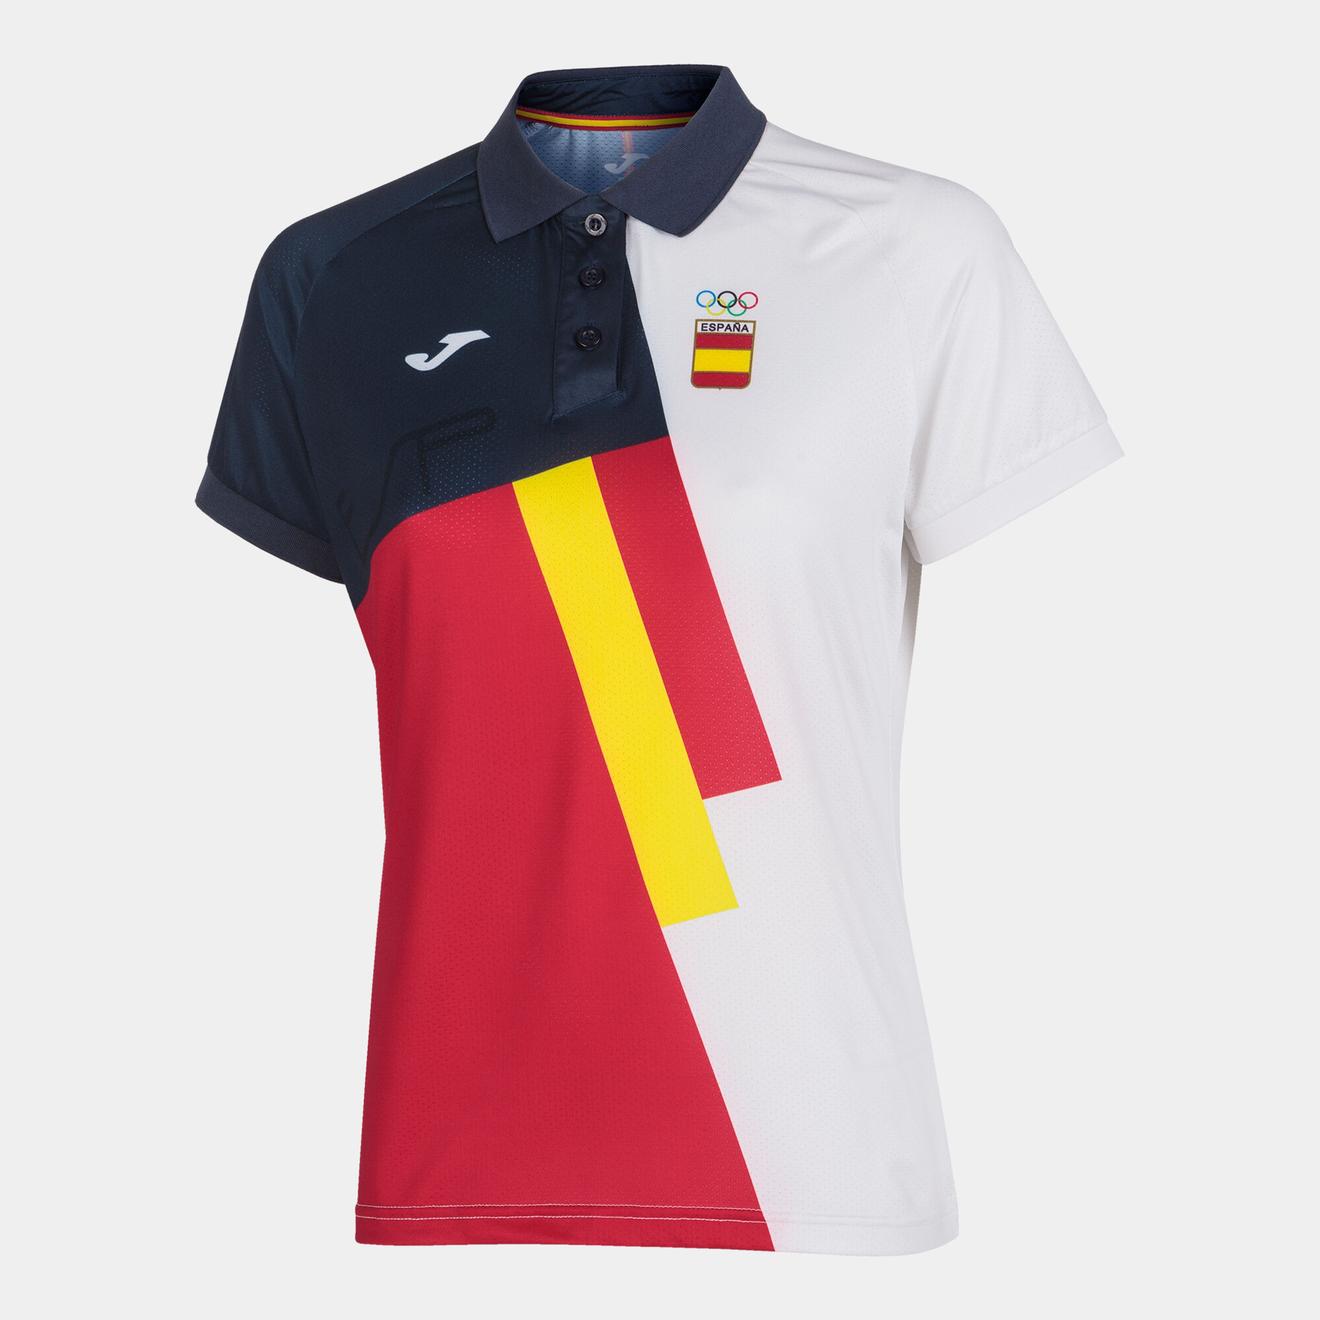 Polo shirt short-sleeve Spanish Olympic Committee offers at £23.1 in Joma